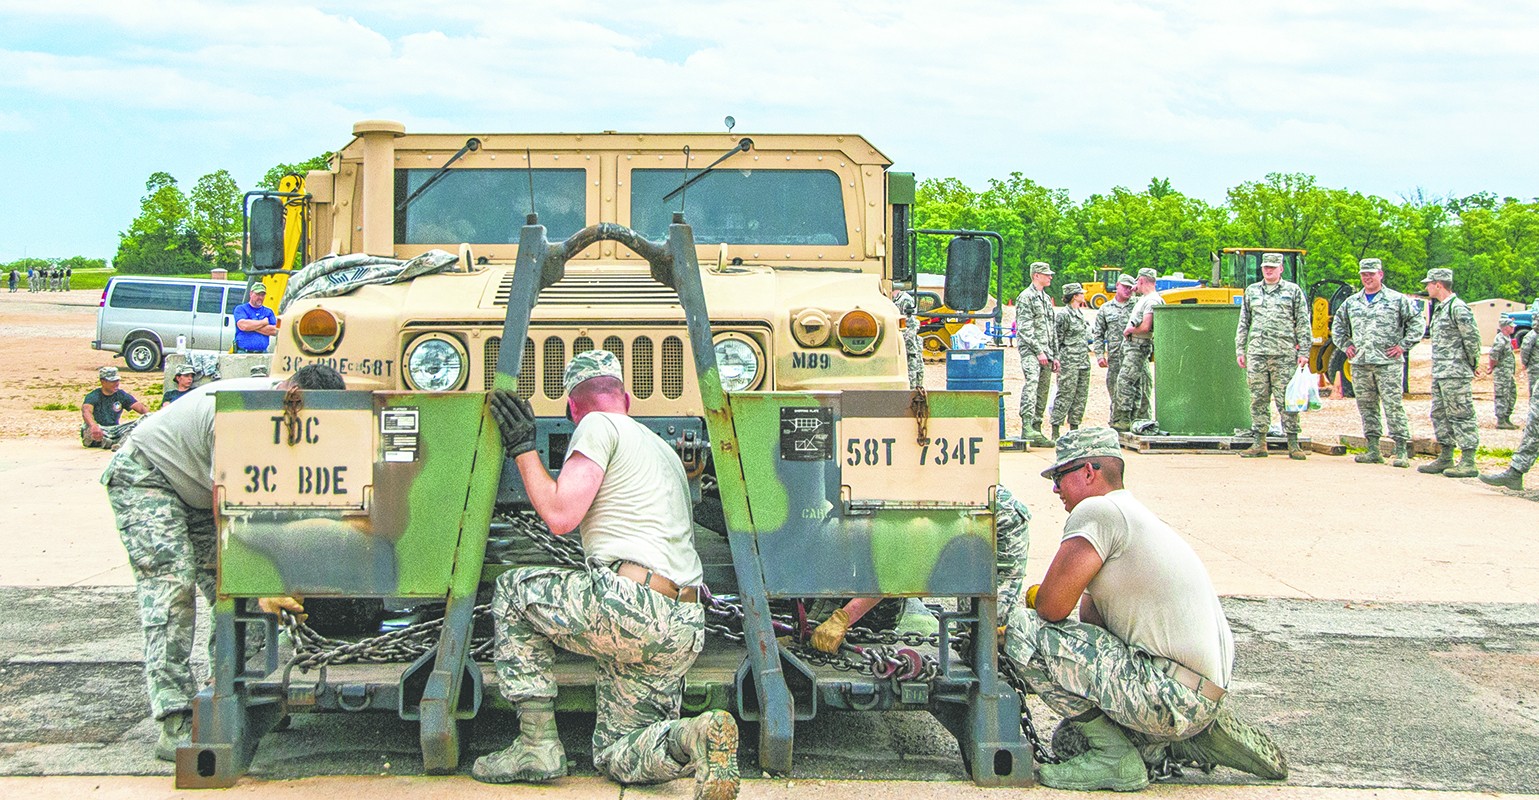 Detachment Holds Air Force Wide Transportation Rodeo At Fort Leonard Wood Article The United States Army